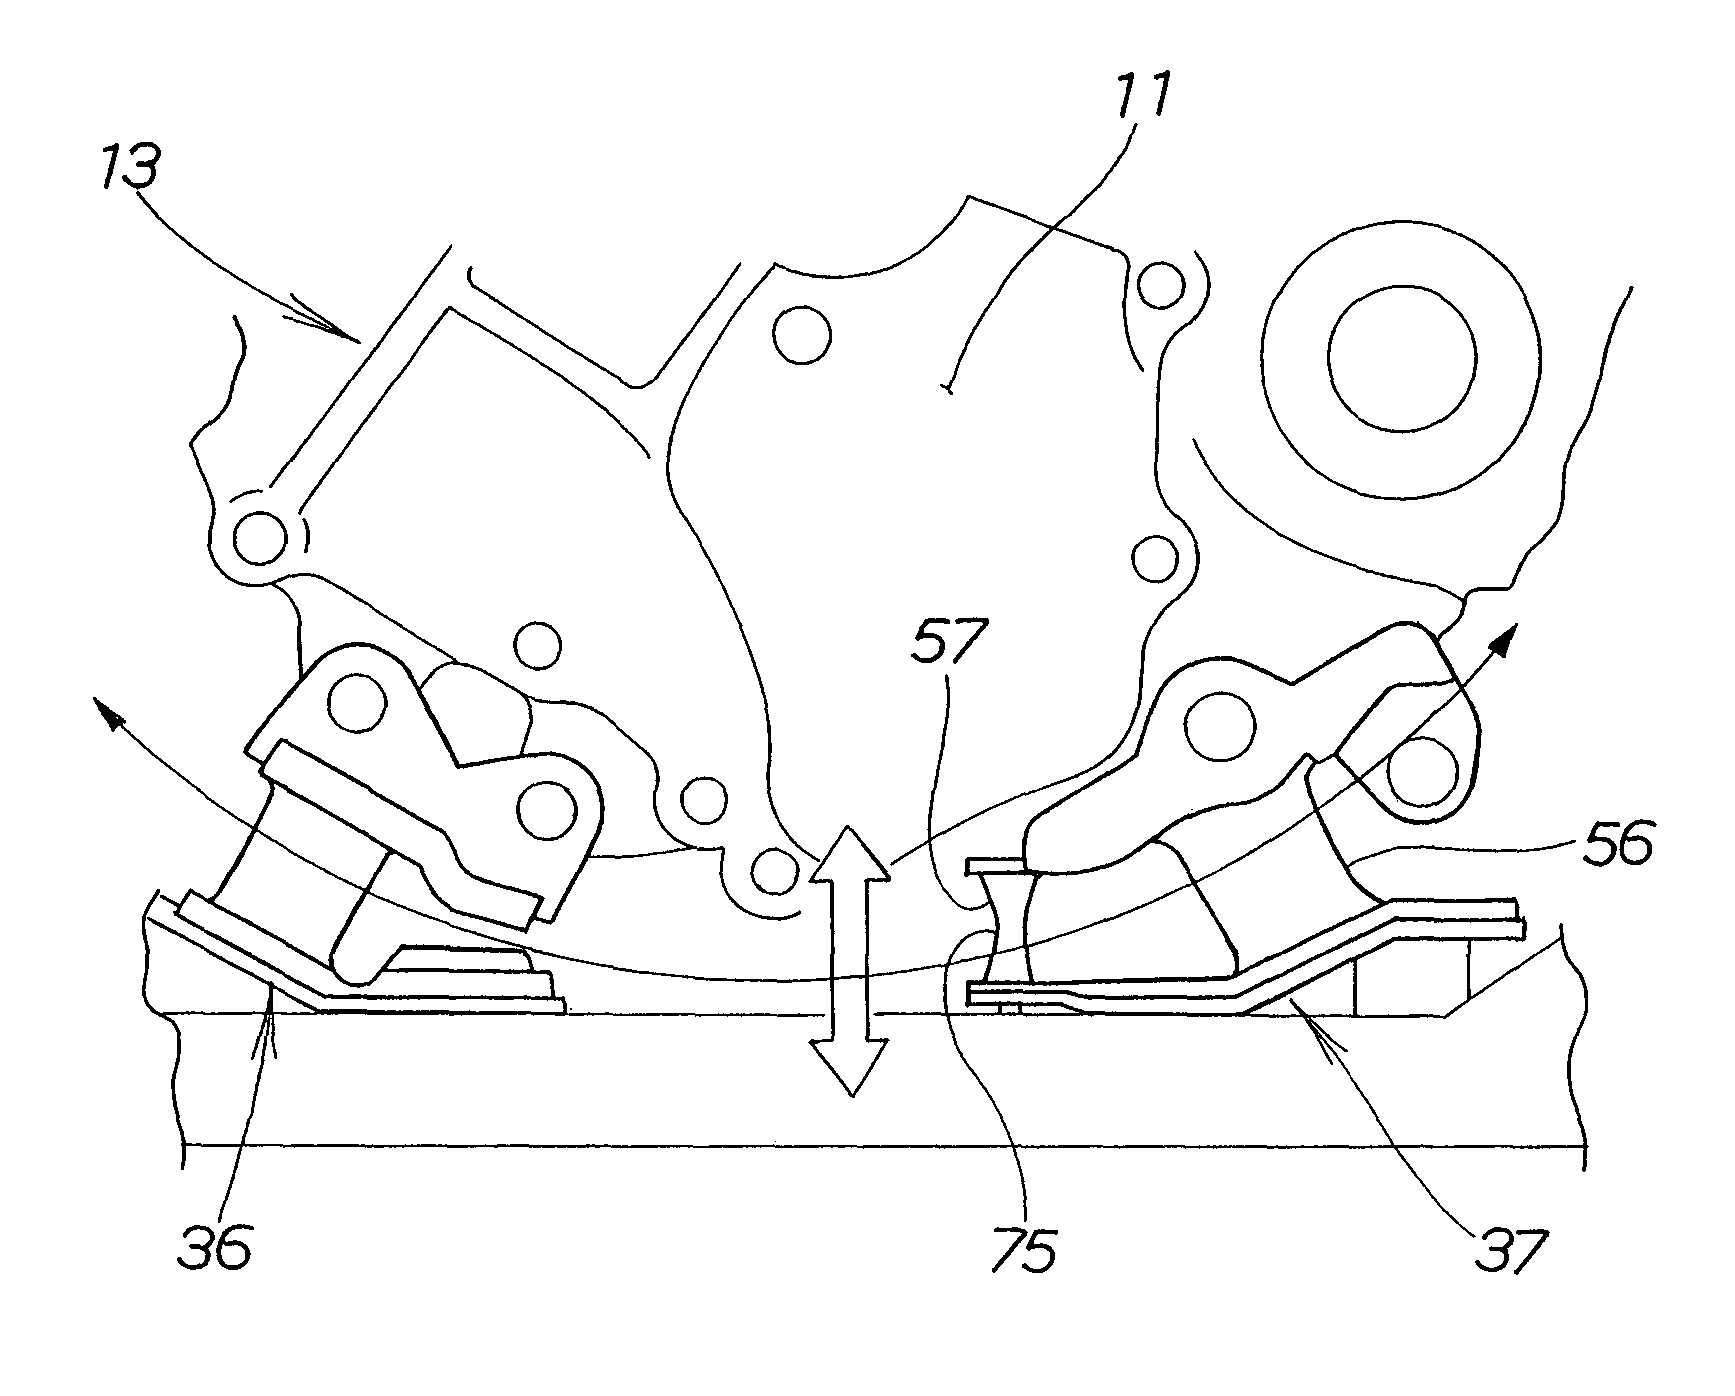 Transmission mount structure for vehicles